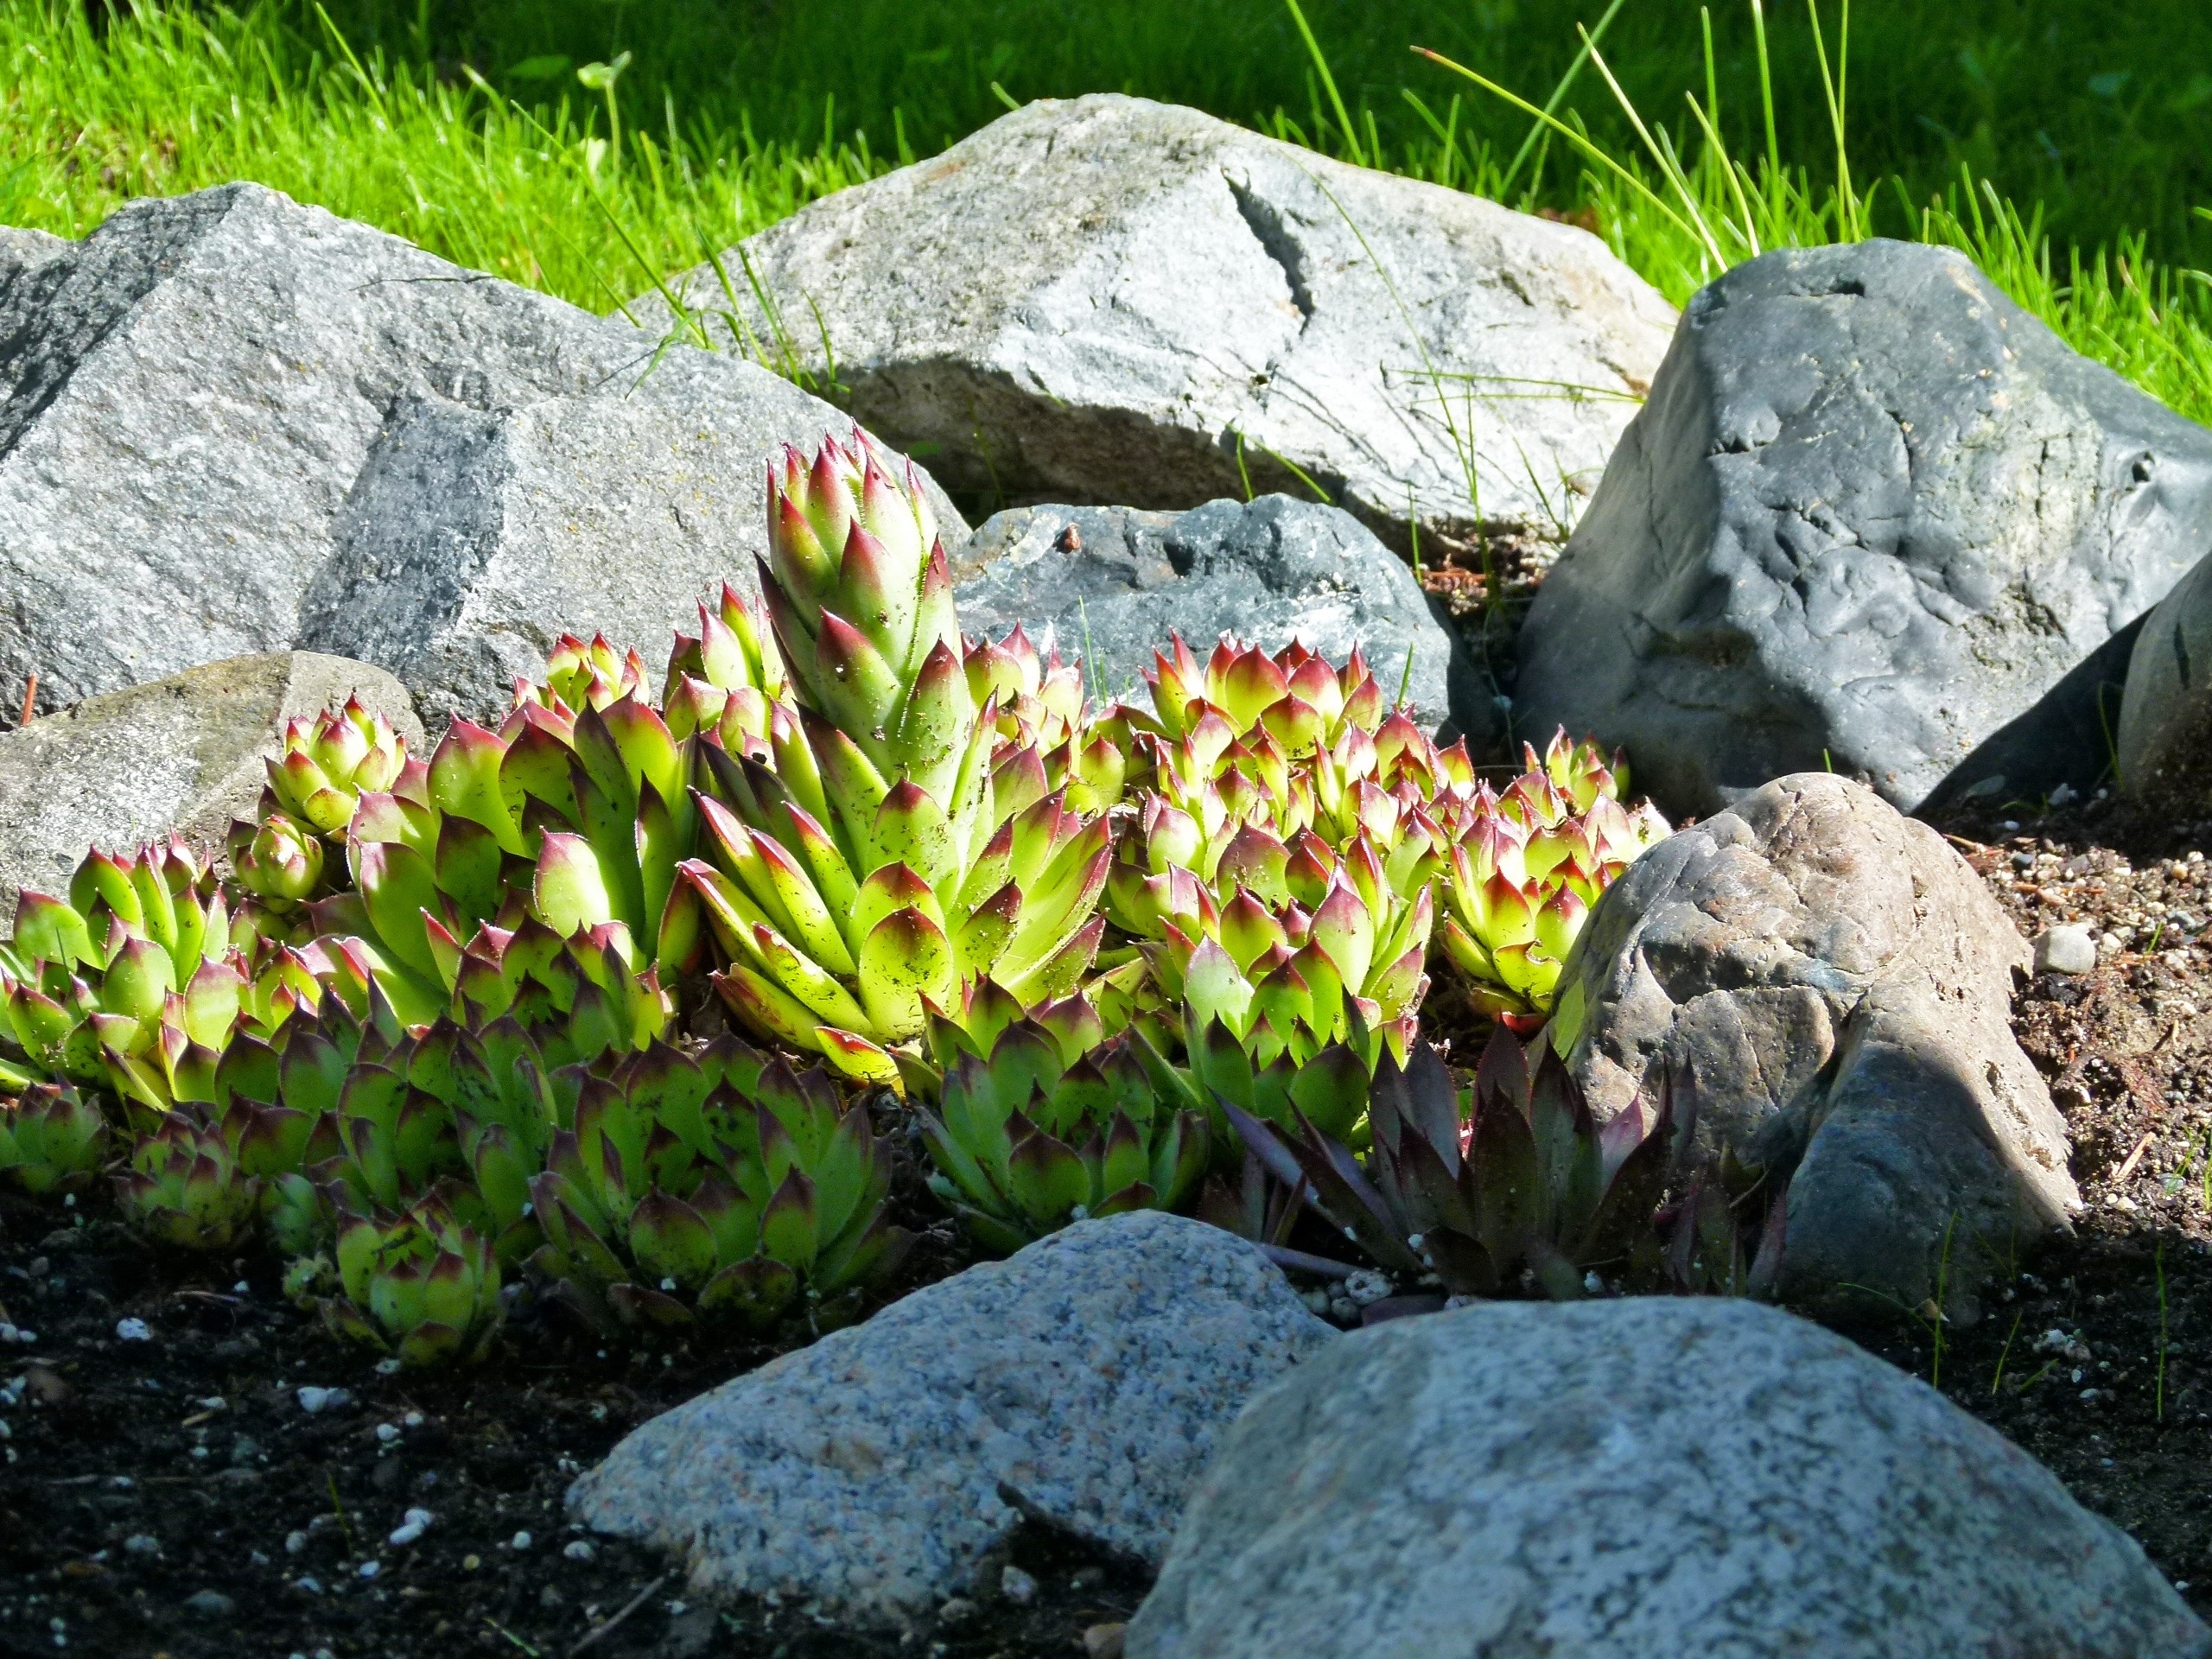 green plant and gray stones]